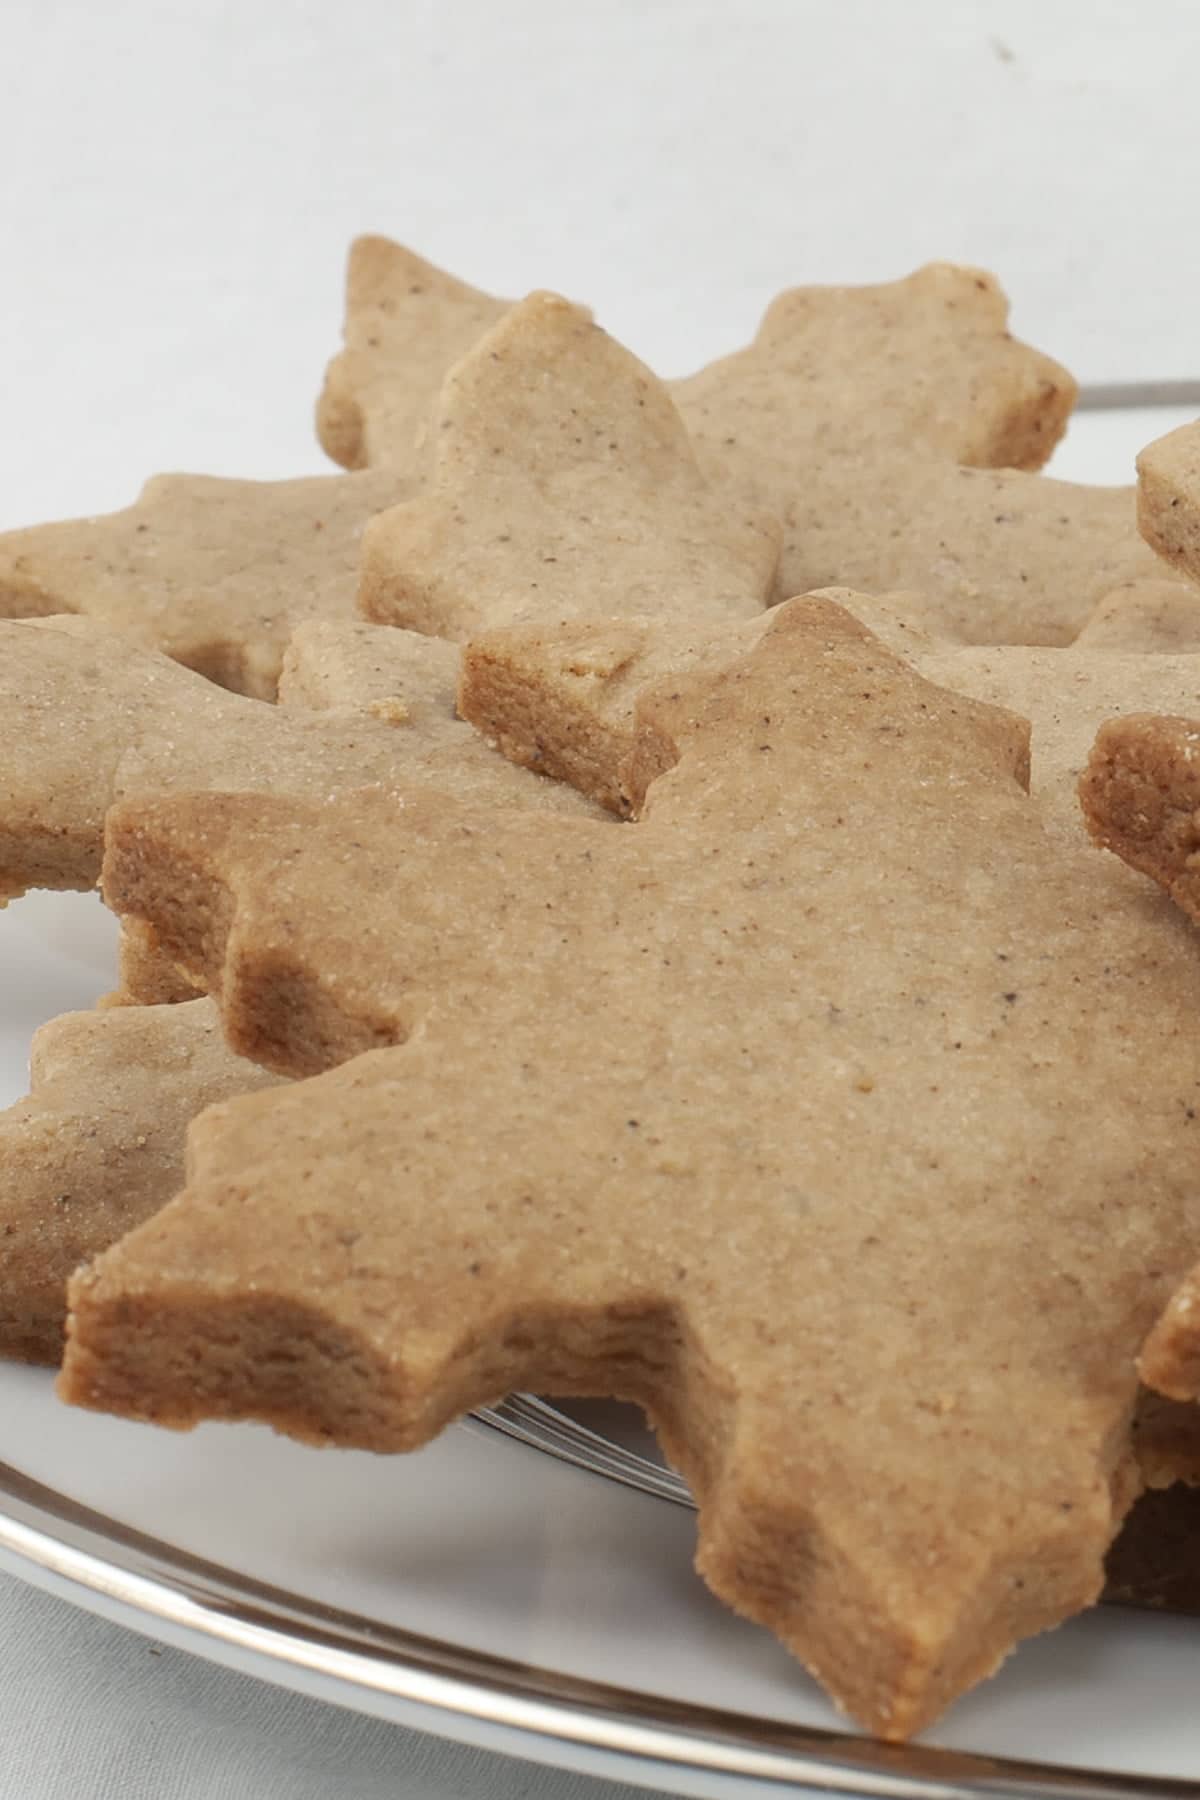 A pile of golden brown shortbread cookies - shaped like snowflakes - are piled on a small white plate.